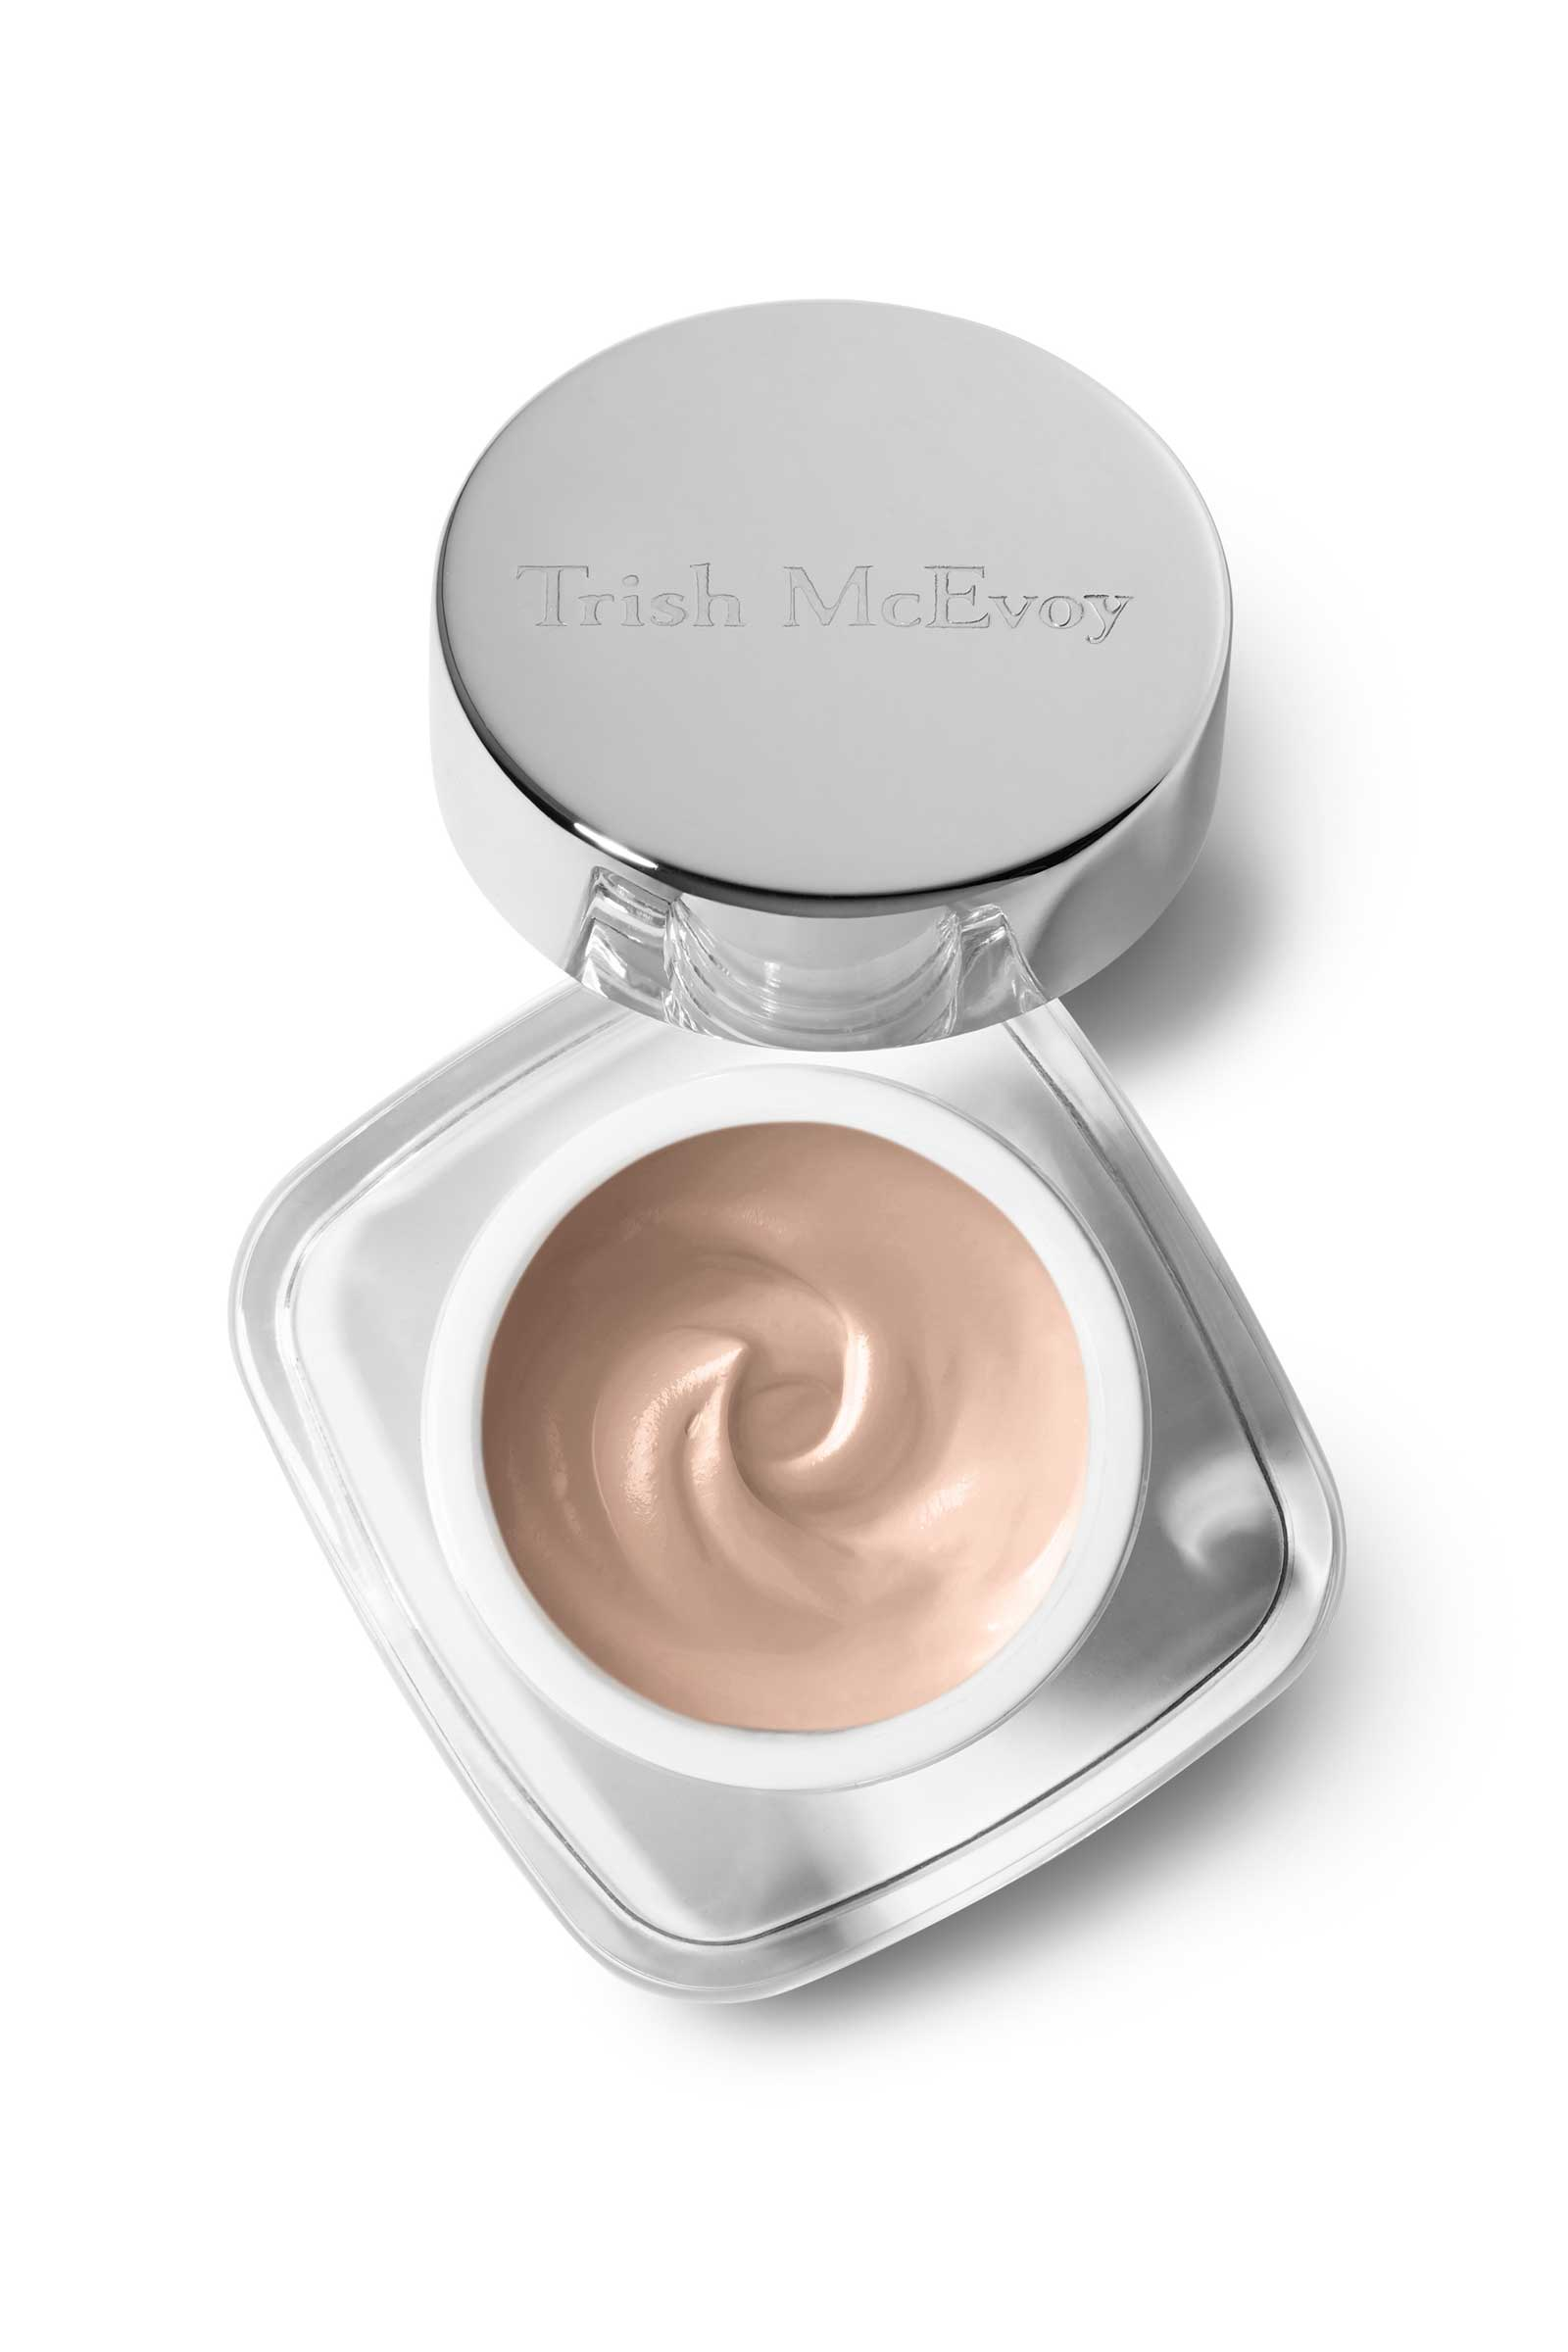 Trish McEvoy Beauty Booster® Soothe and Illuminate Cream